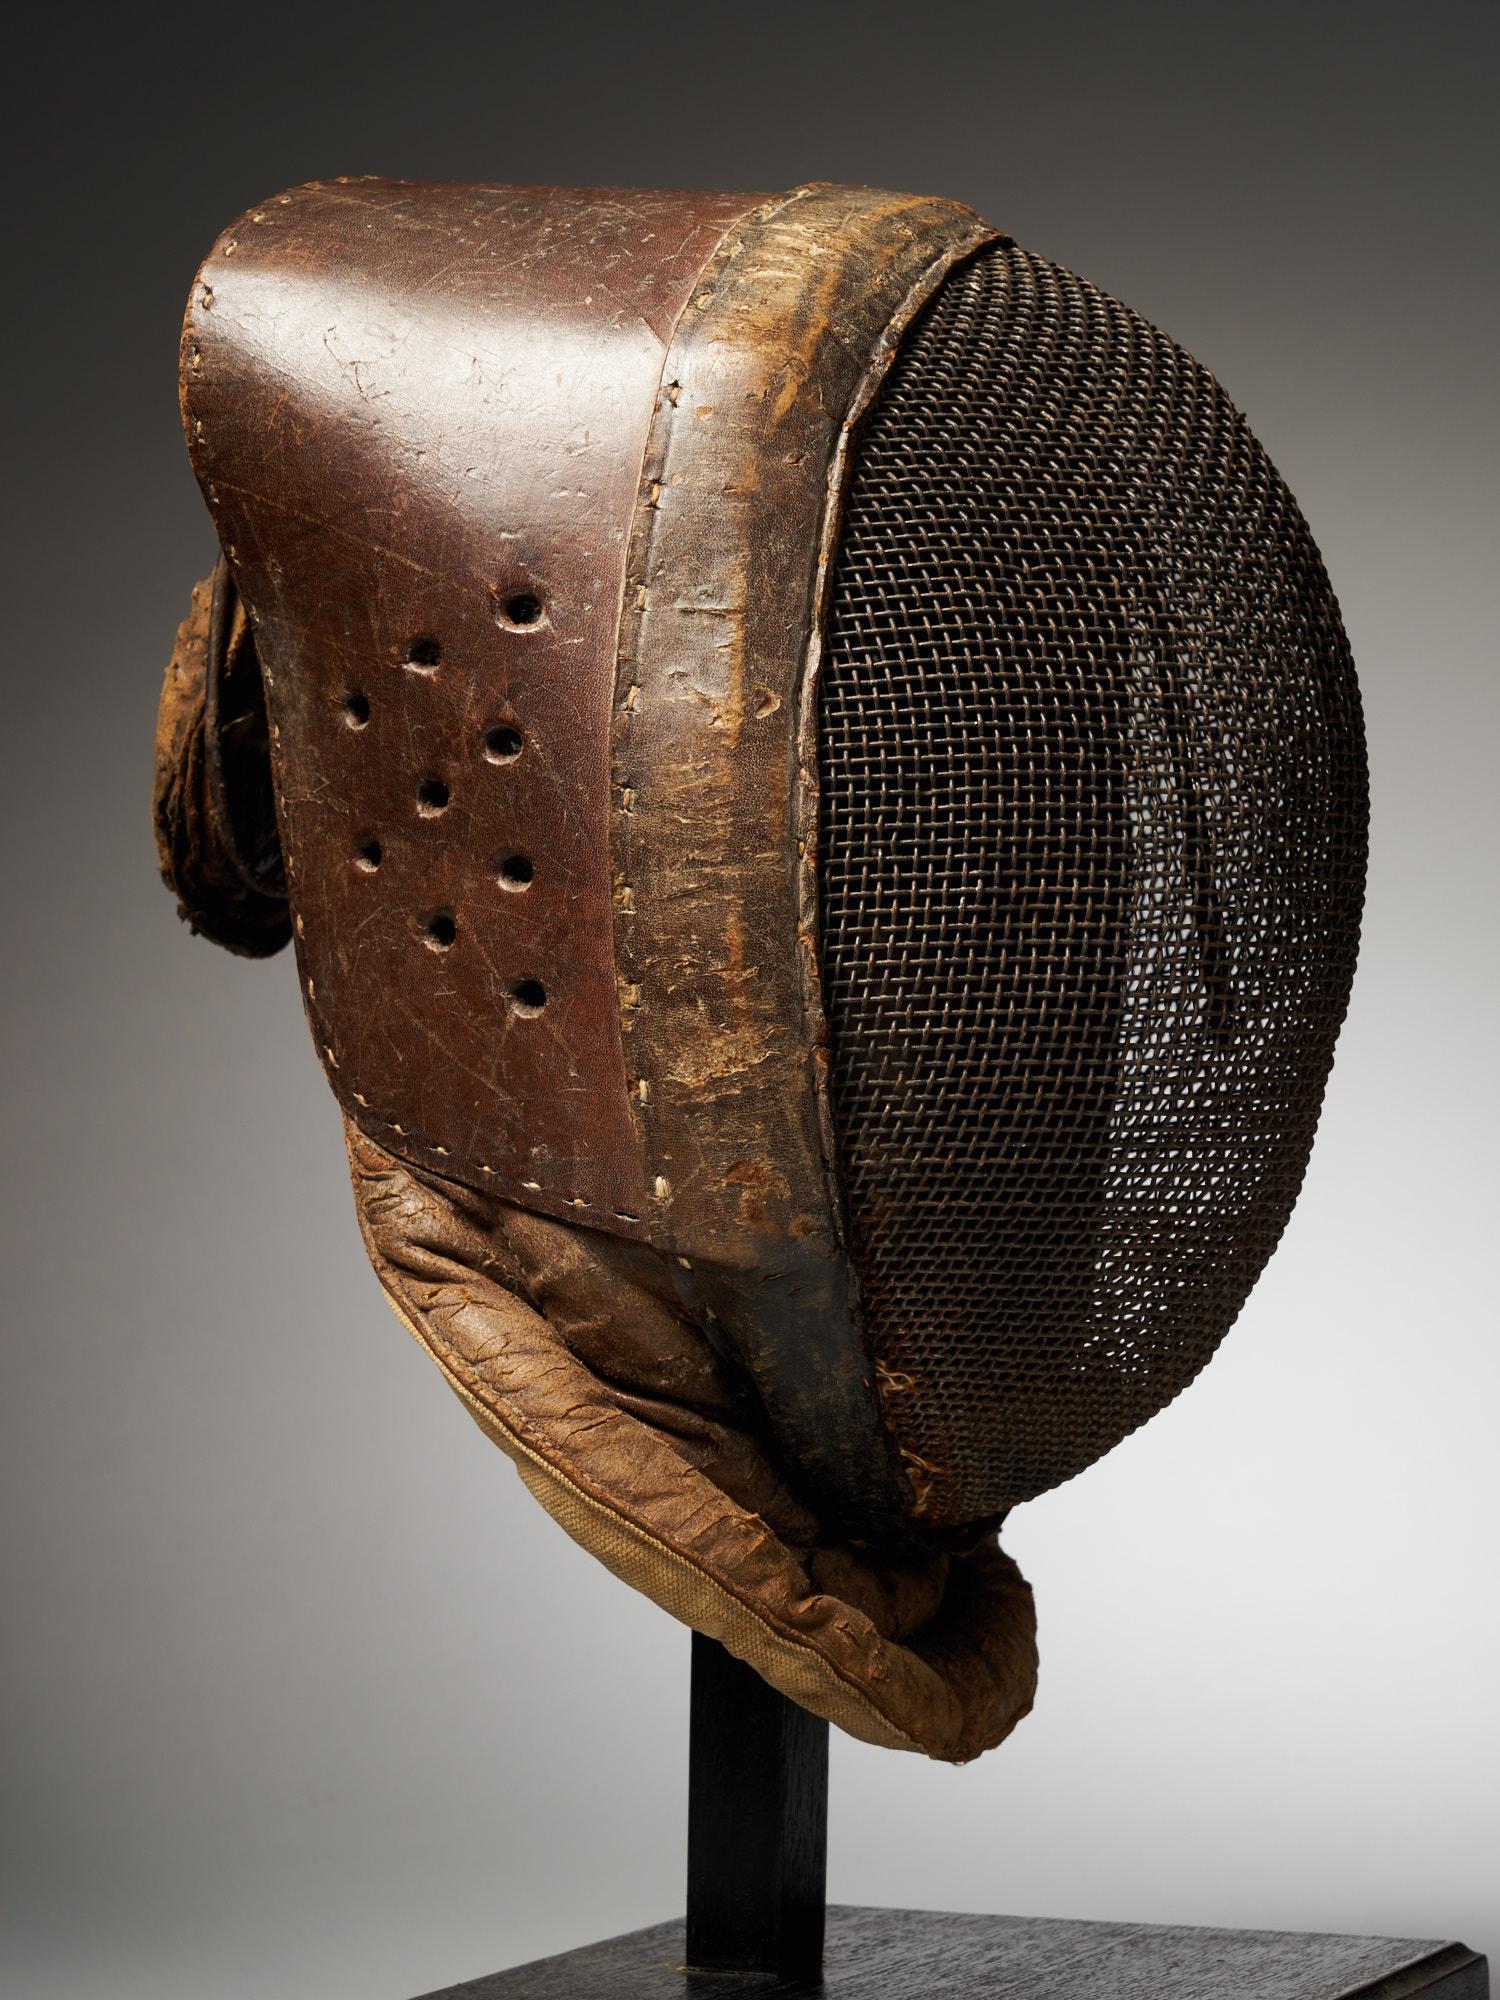 This is a leather fencing mask from the 20th century and it is manufactured in France. The mask has clearly been worn, as can be told from the leather.